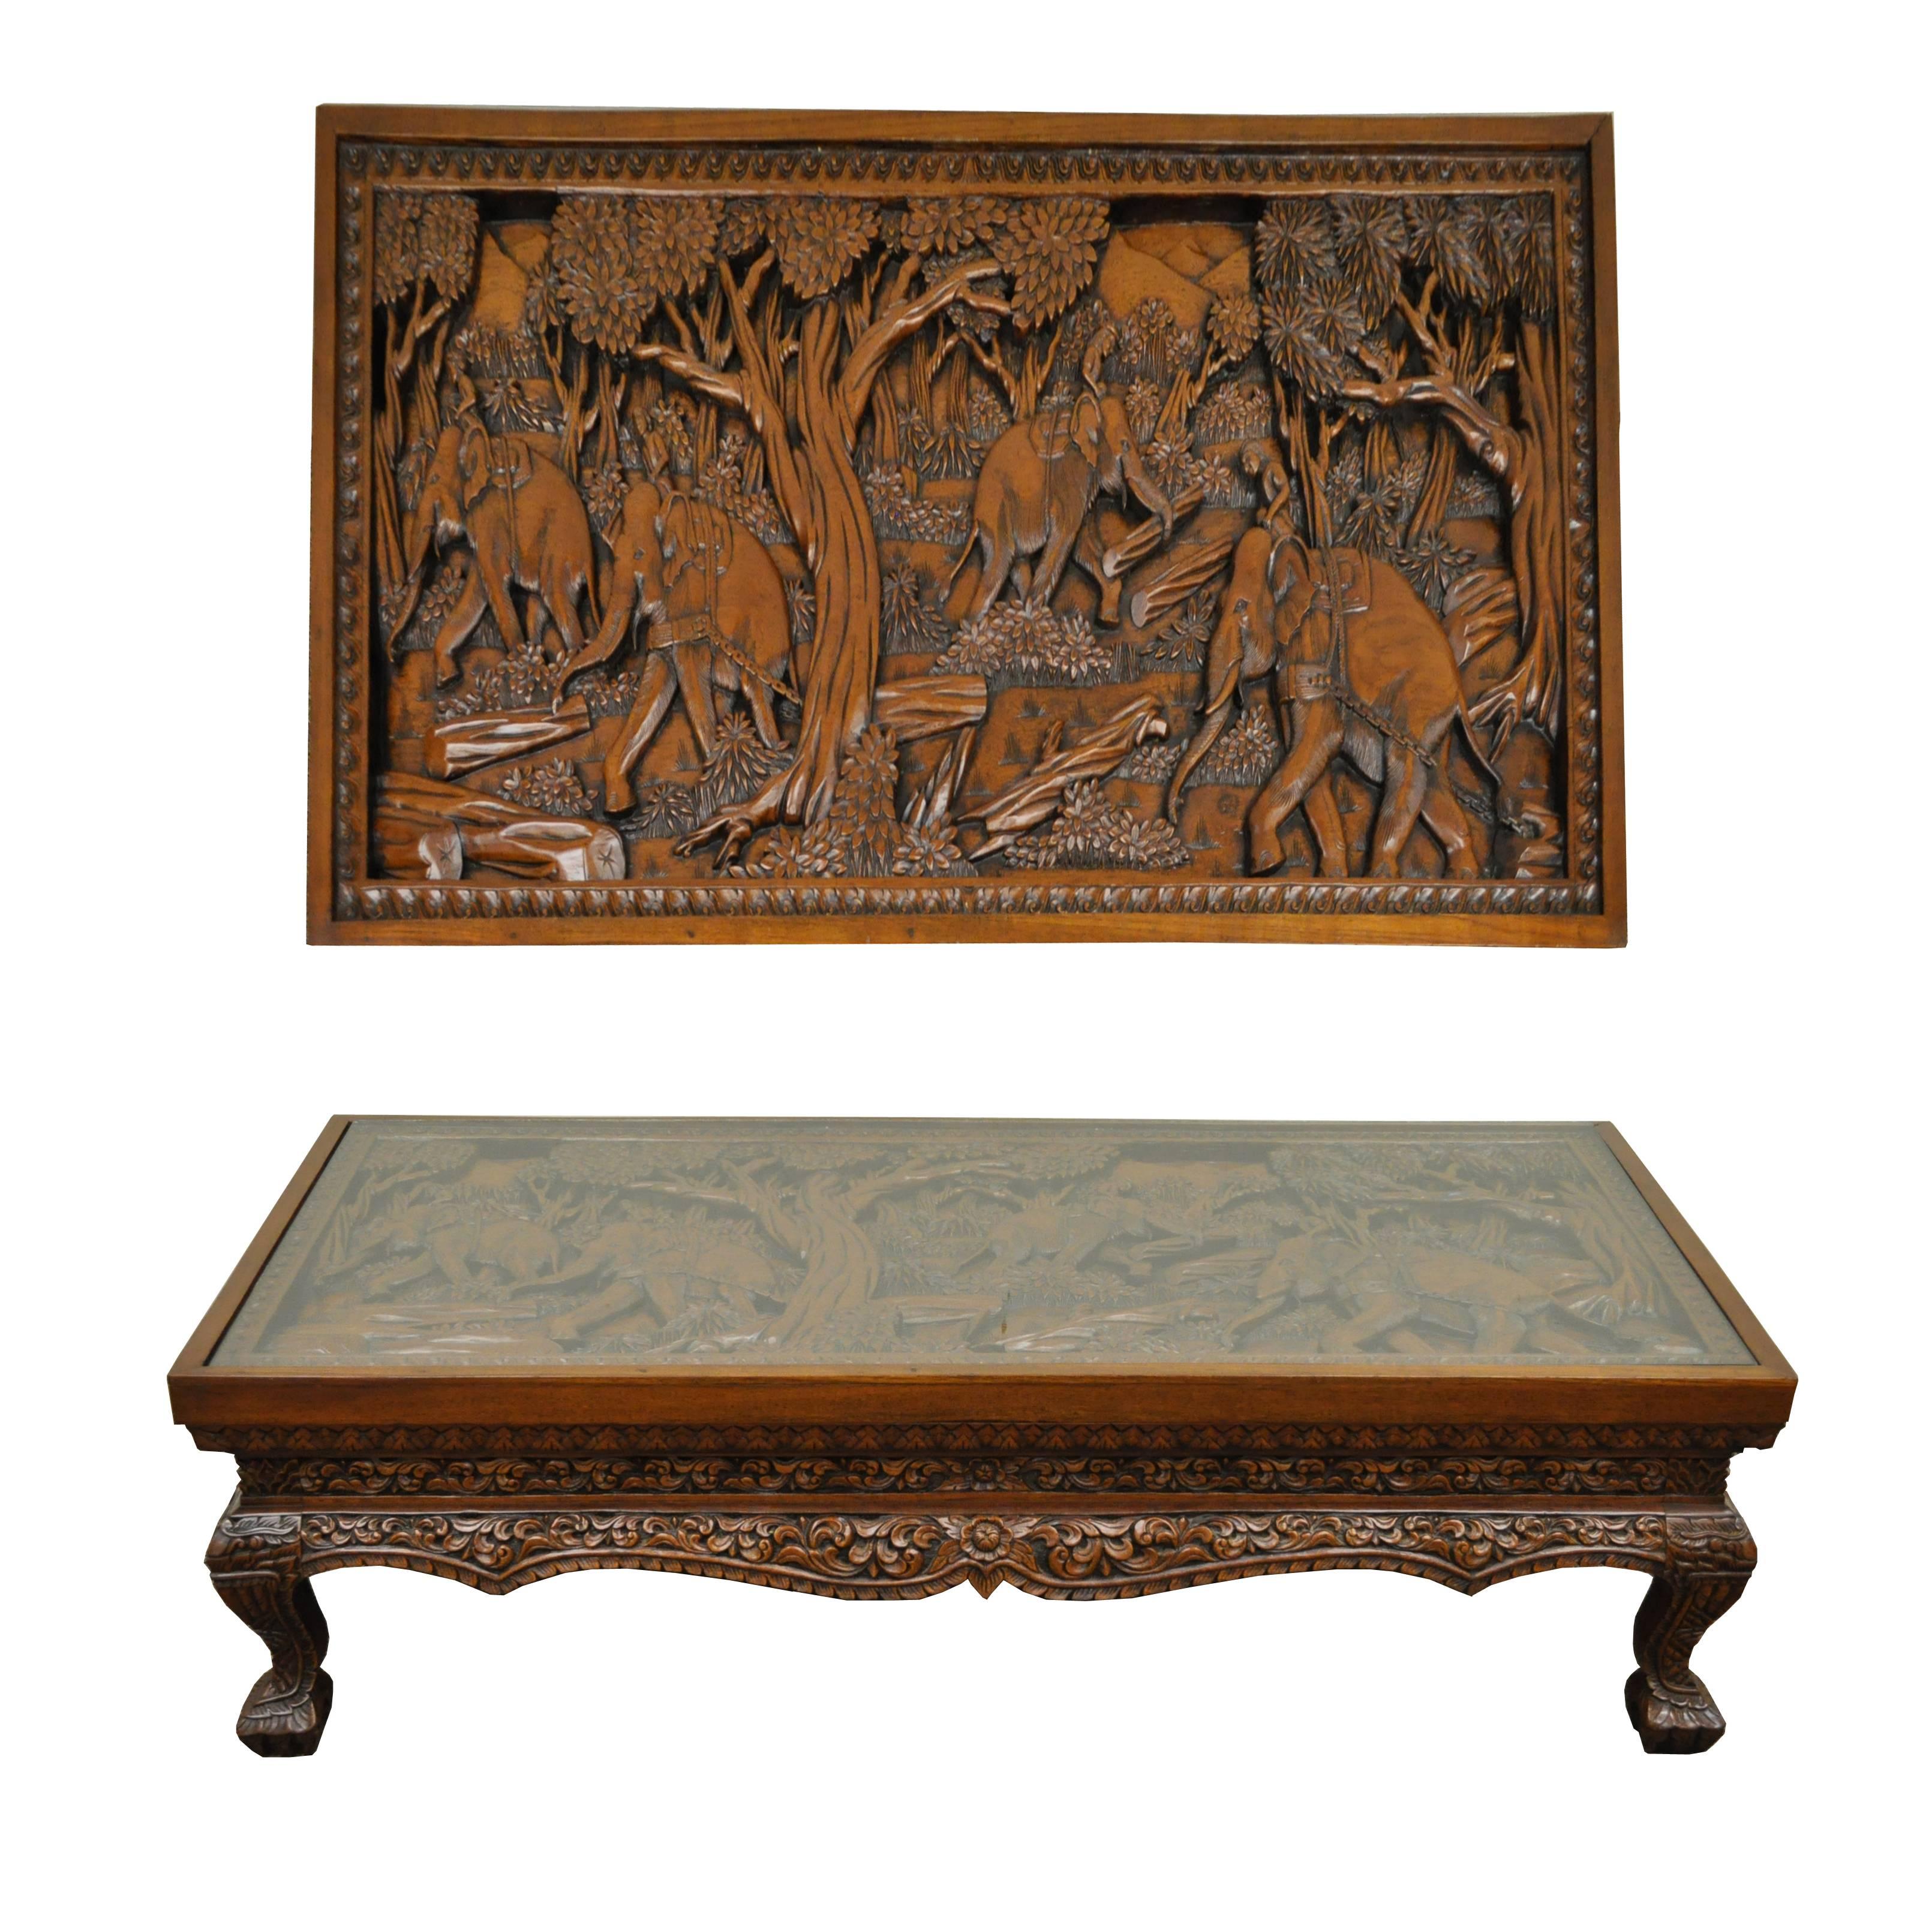 Inset glass top deep relief carved Vietnamese low table. Heavily carved throughout depicting elephants working in a forest. Very nicely done with figural carved legs/feet and floral acanthus carved skirt. Believed to be solid teak wood or solid